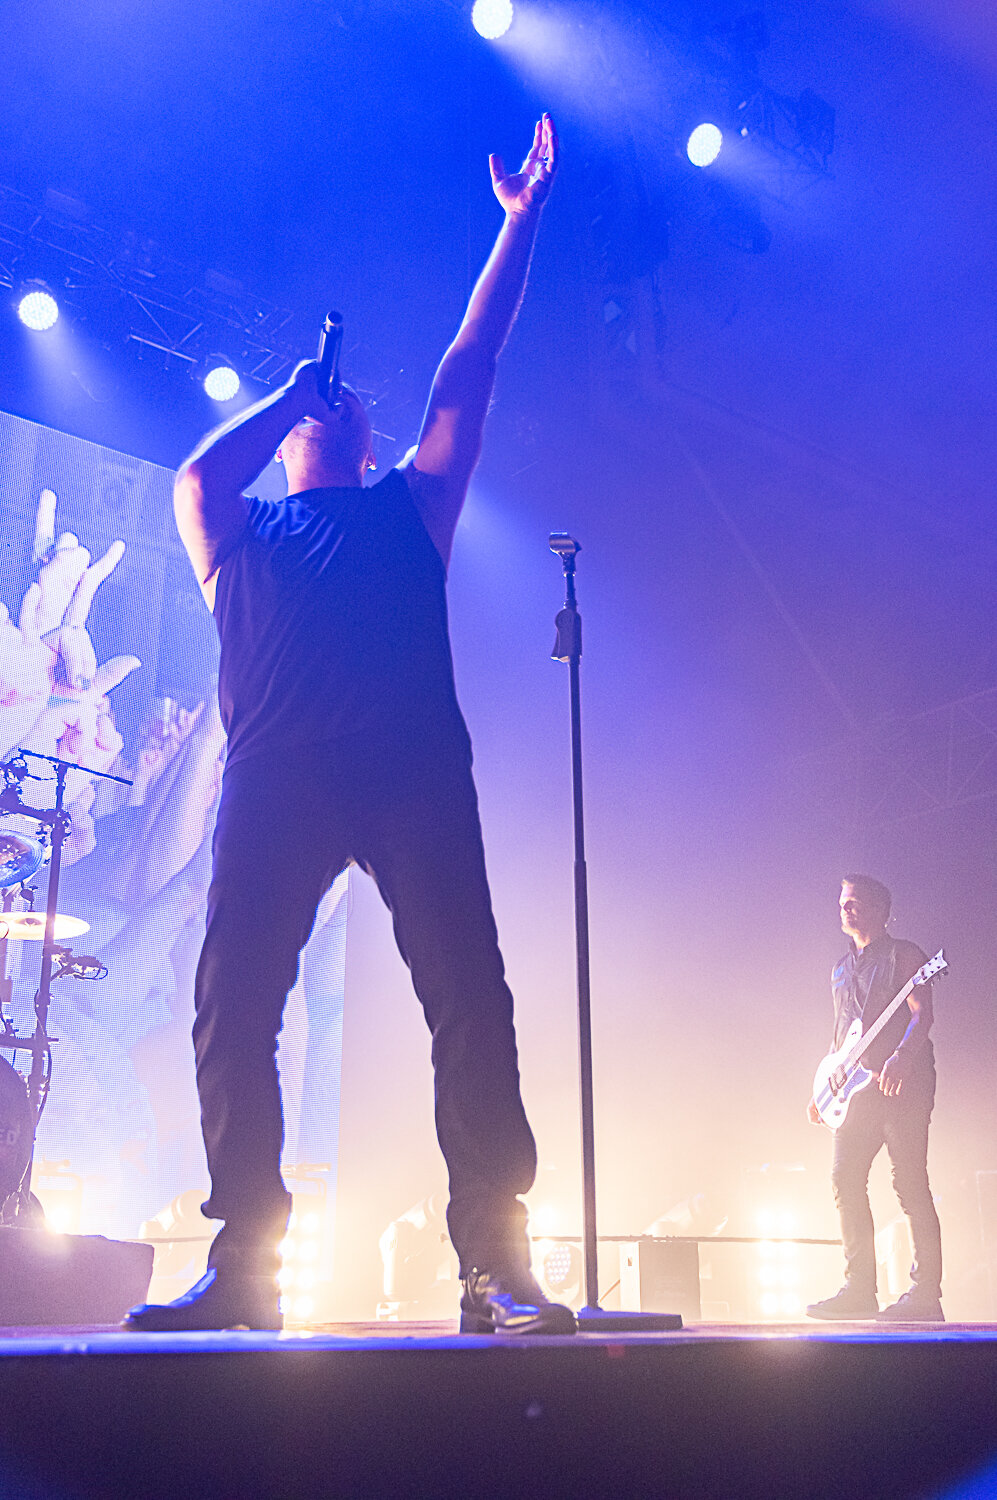 Disturbed Live from Alexandra Palace, 11 May 2019